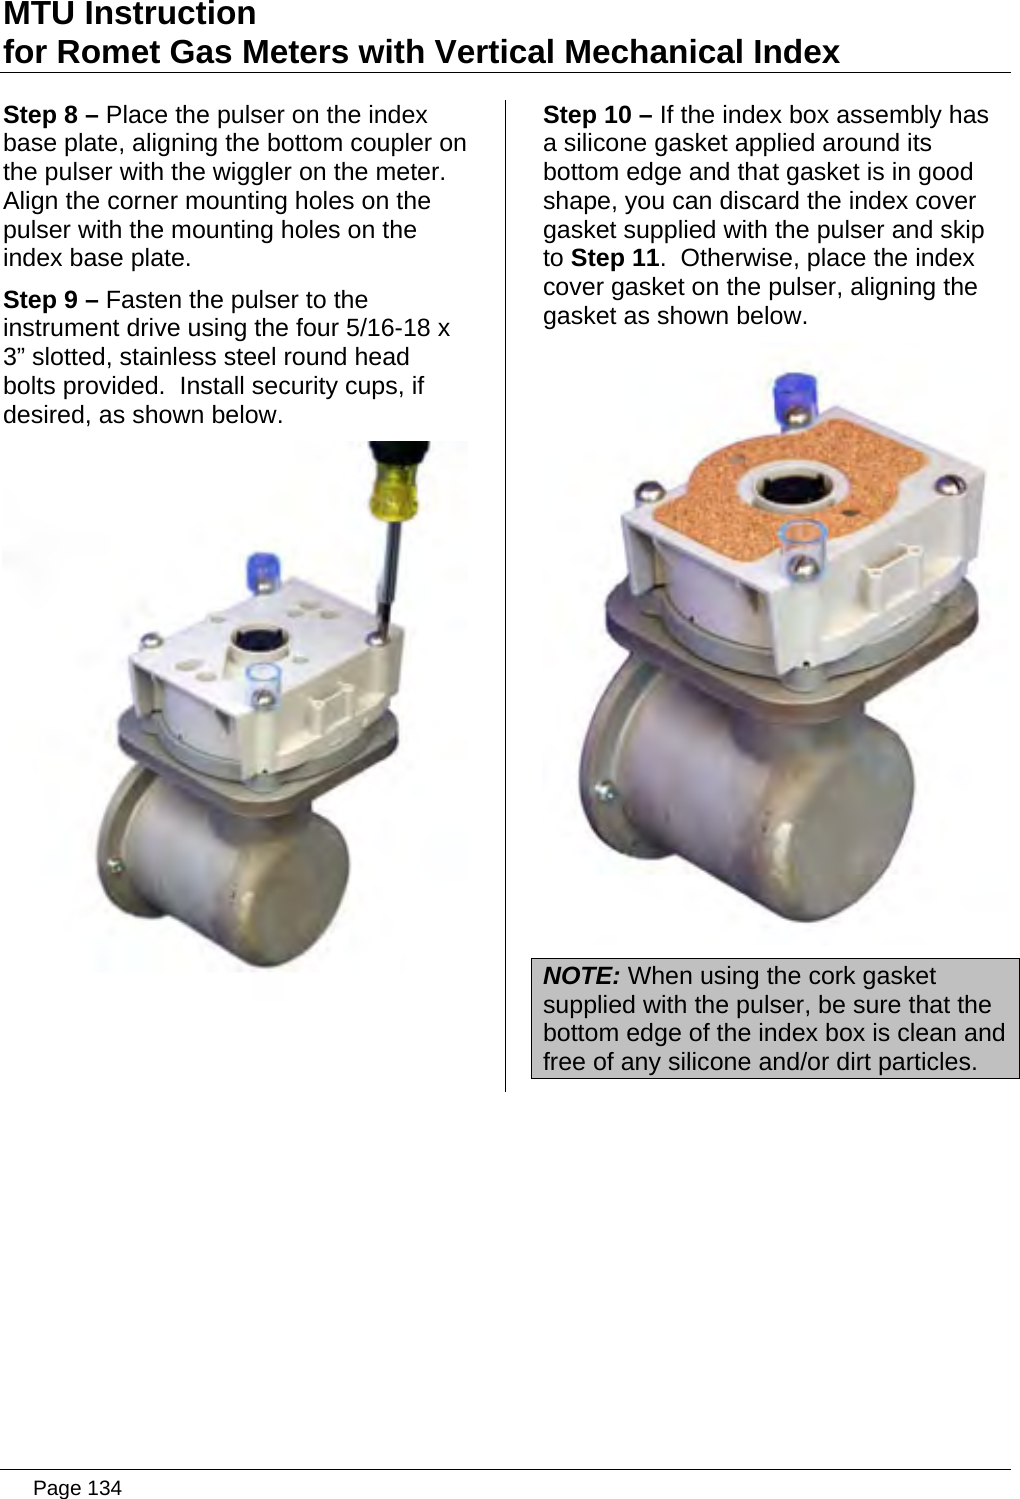 MTU Instruction for Romet Gas Meters with Vertical Mechanical Index Step 8 – Place the pulser on the index base plate, aligning the bottom coupler on the pulser with the wiggler on the meter.  Align the corner mounting holes on the pulser with the mounting holes on the index base plate. Step 9 – Fasten the pulser to the instrument drive using the four 5/16-18 x 3” slotted, stainless steel round head bolts provided.  Install security cups, if desired, as shown below.  Step 10 – If the index box assembly has a silicone gasket applied around its bottom edge and that gasket is in good shape, you can discard the index cover gasket supplied with the pulser and skip to Step 11.  Otherwise, place the index cover gasket on the pulser, aligning the gasket as shown below.  NOTE: When using the cork gasket supplied with the pulser, be sure that the bottom edge of the index box is clean and free of any silicone and/or dirt particles.   Page 134